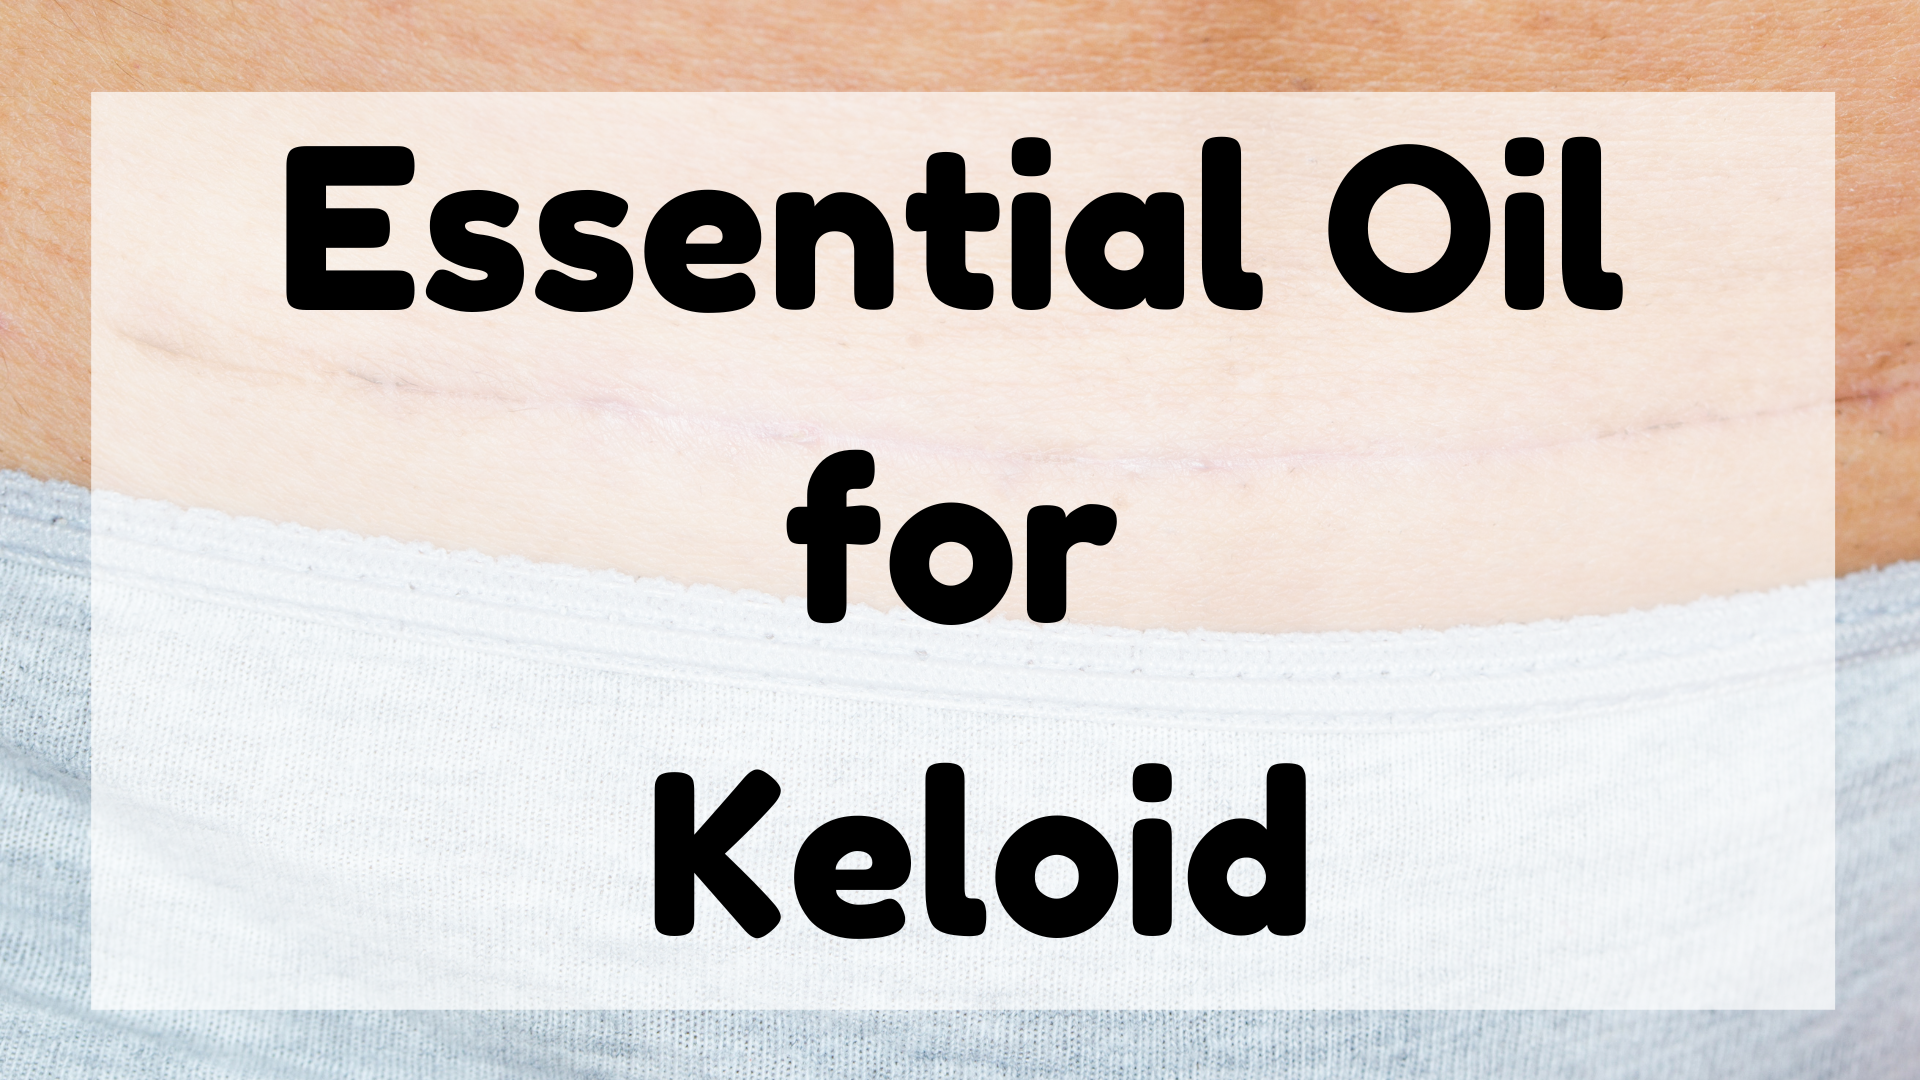 Essential Oil for Keloid featured image